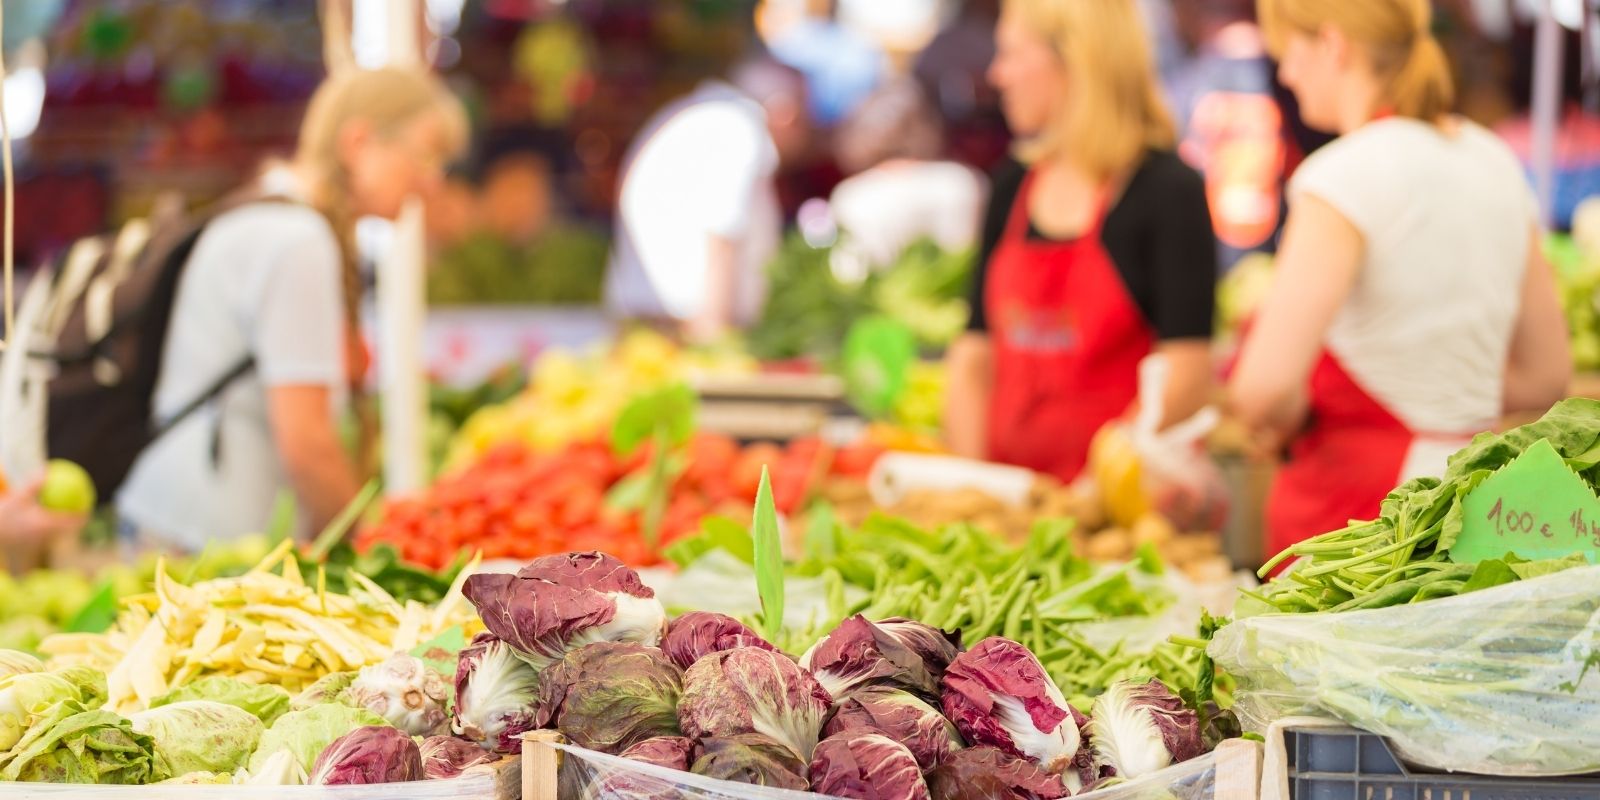 Close up shot of vegetables at a farmer's market table with customers in background.